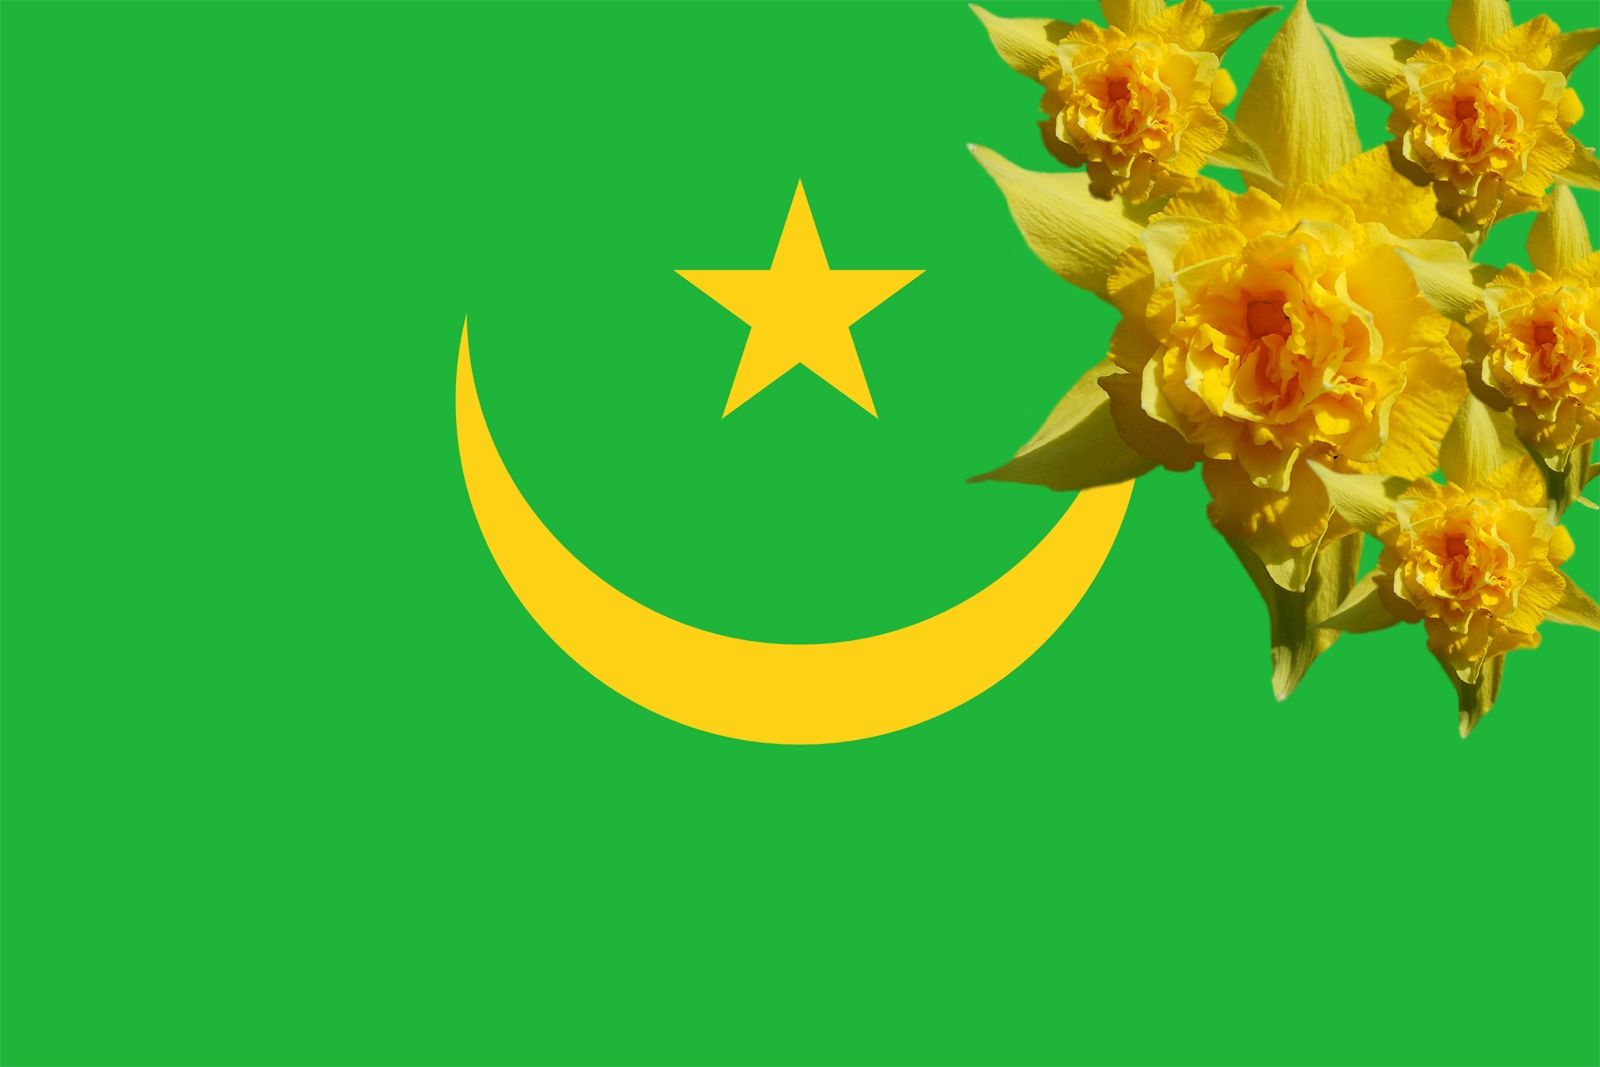 green flowers flags moon and star yellow flowers 1600x1067 wallpaper High Quality Wallpaper, High Definition Wallpaper